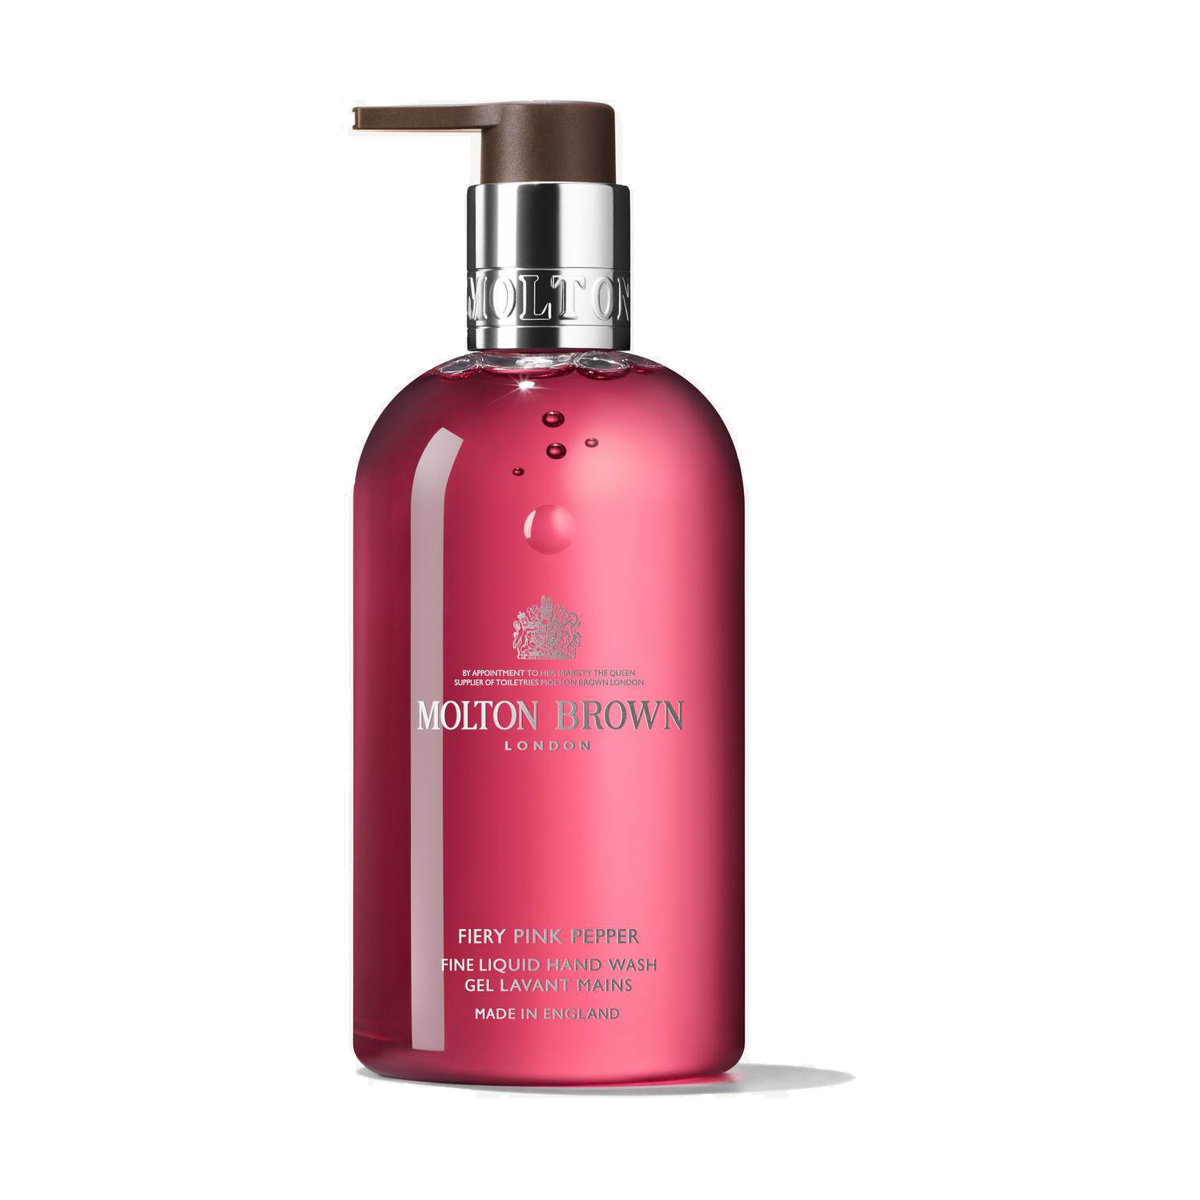 Molton Brown Fiery Pink Pepper Hand Wash 300 ml